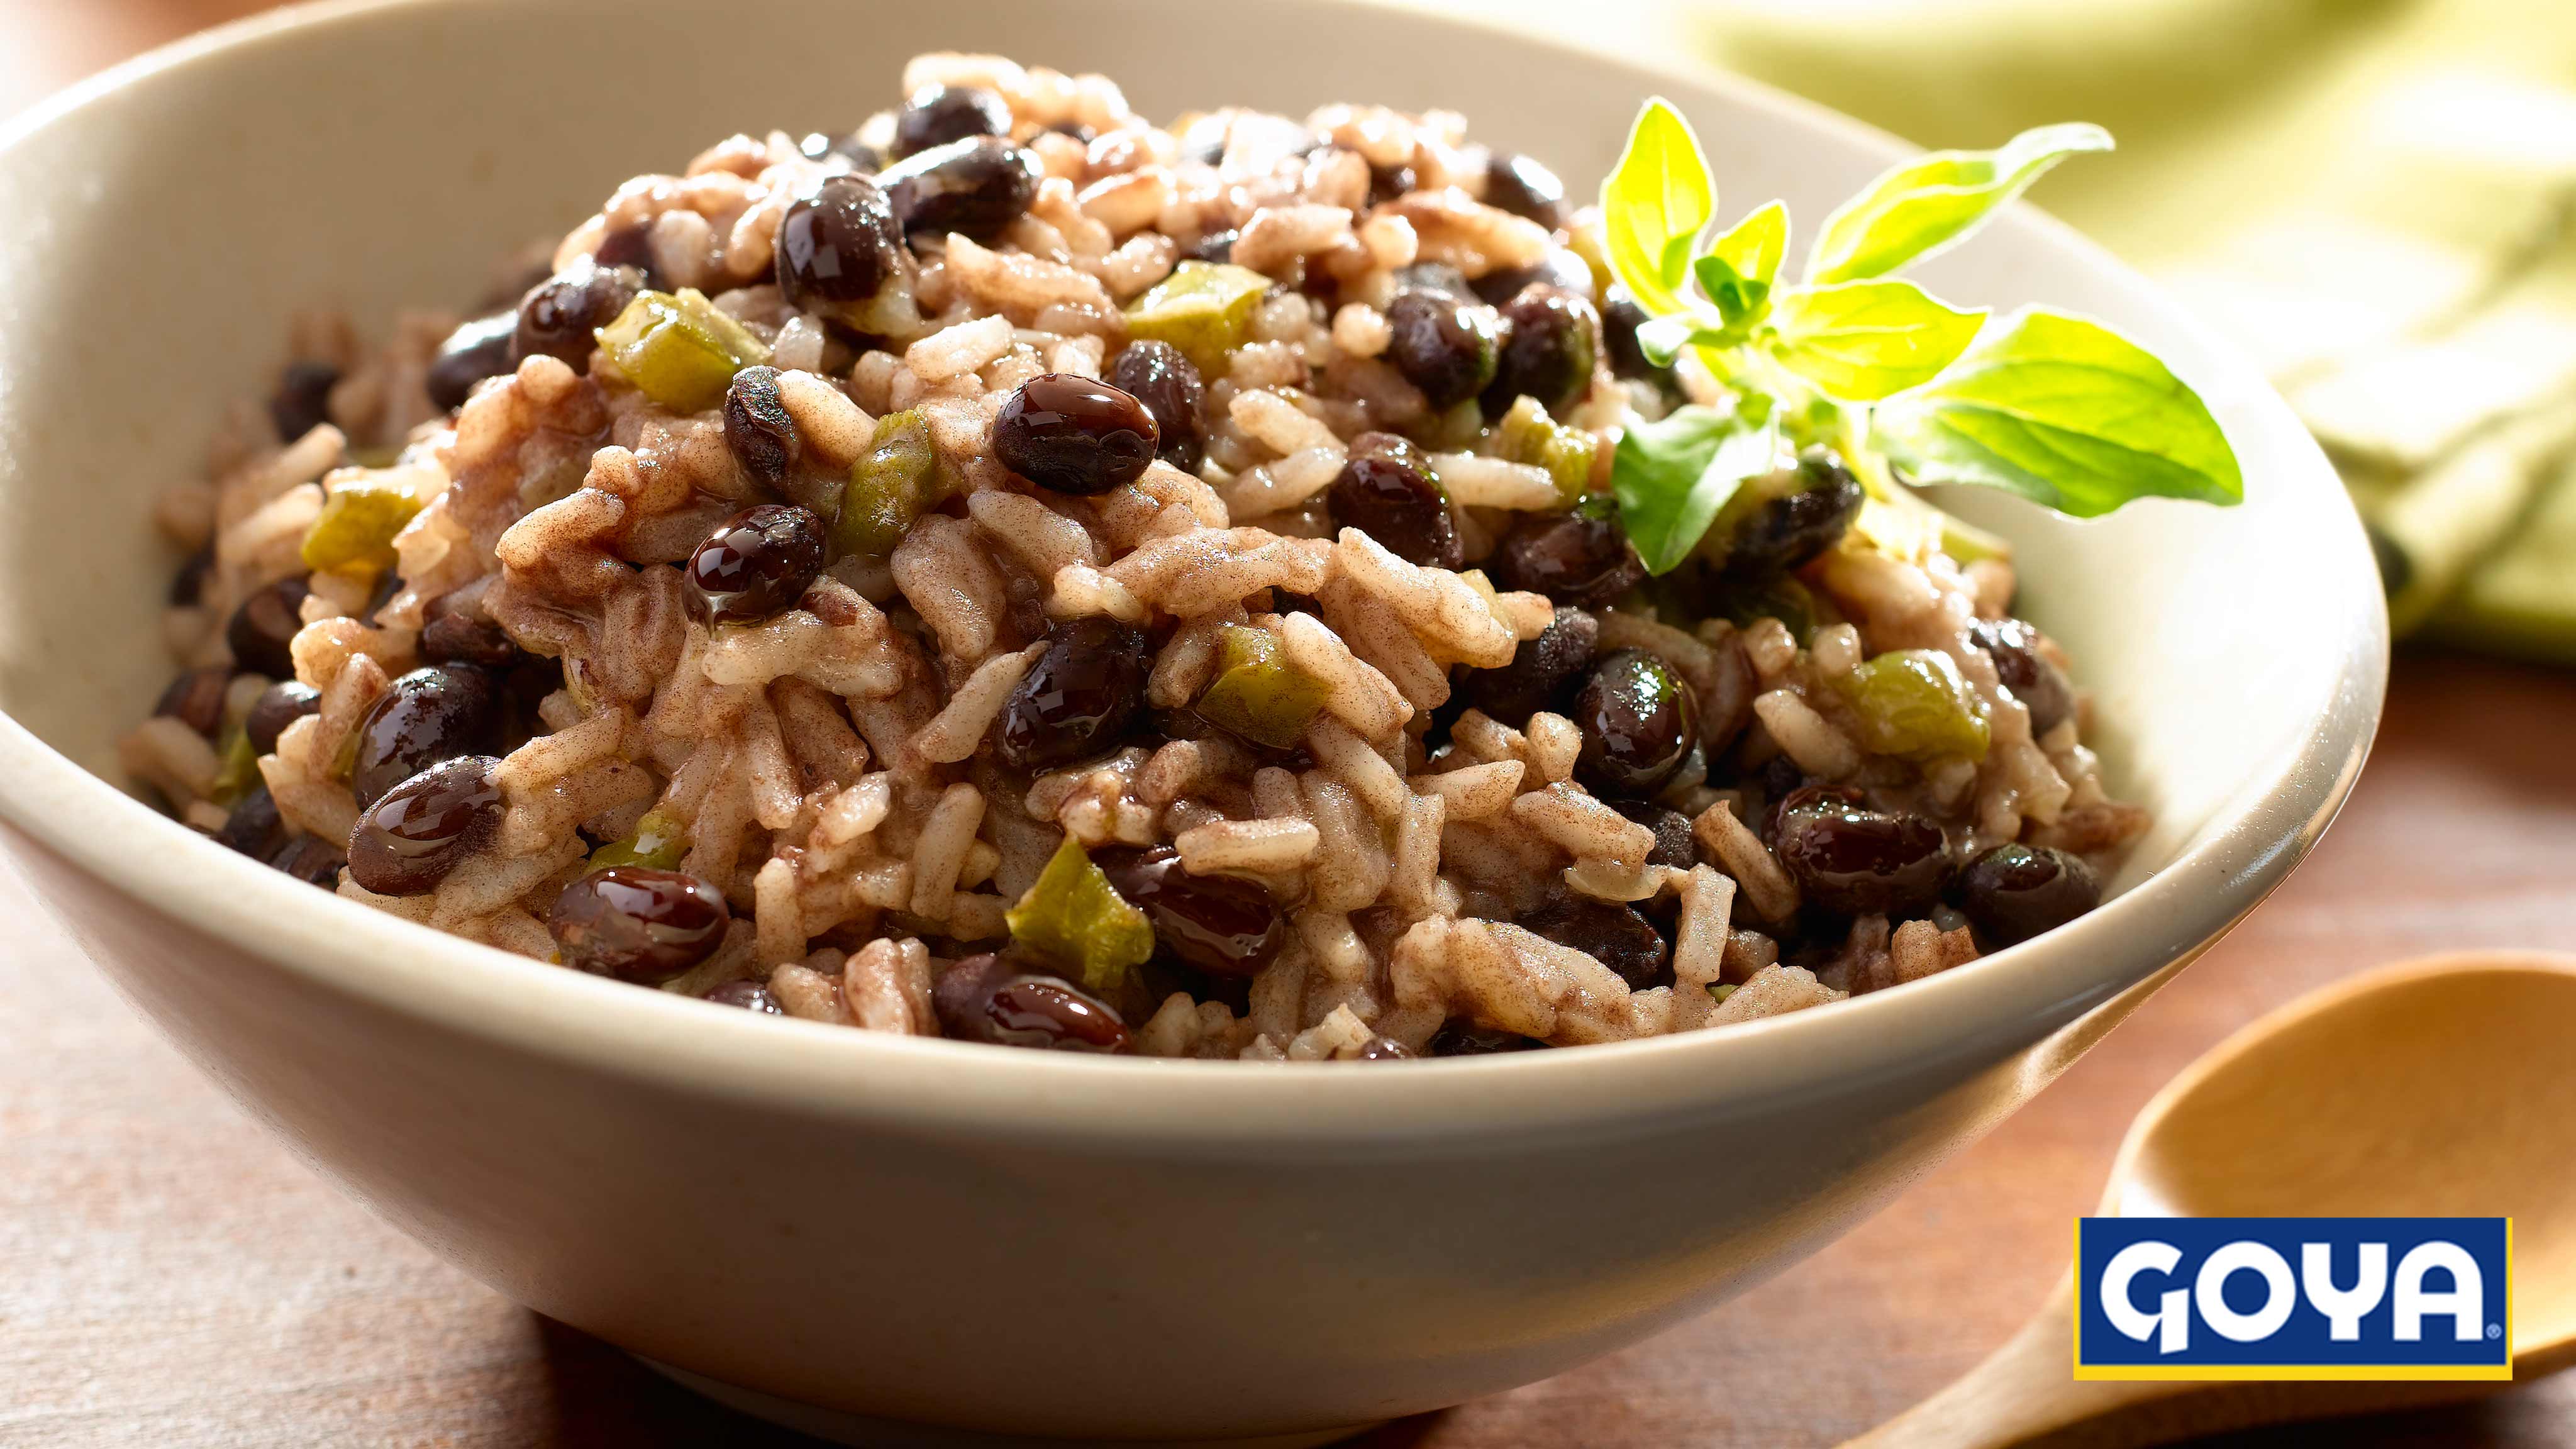 Image for Recipe Moros y Cristianos (Black Beans and Rice)